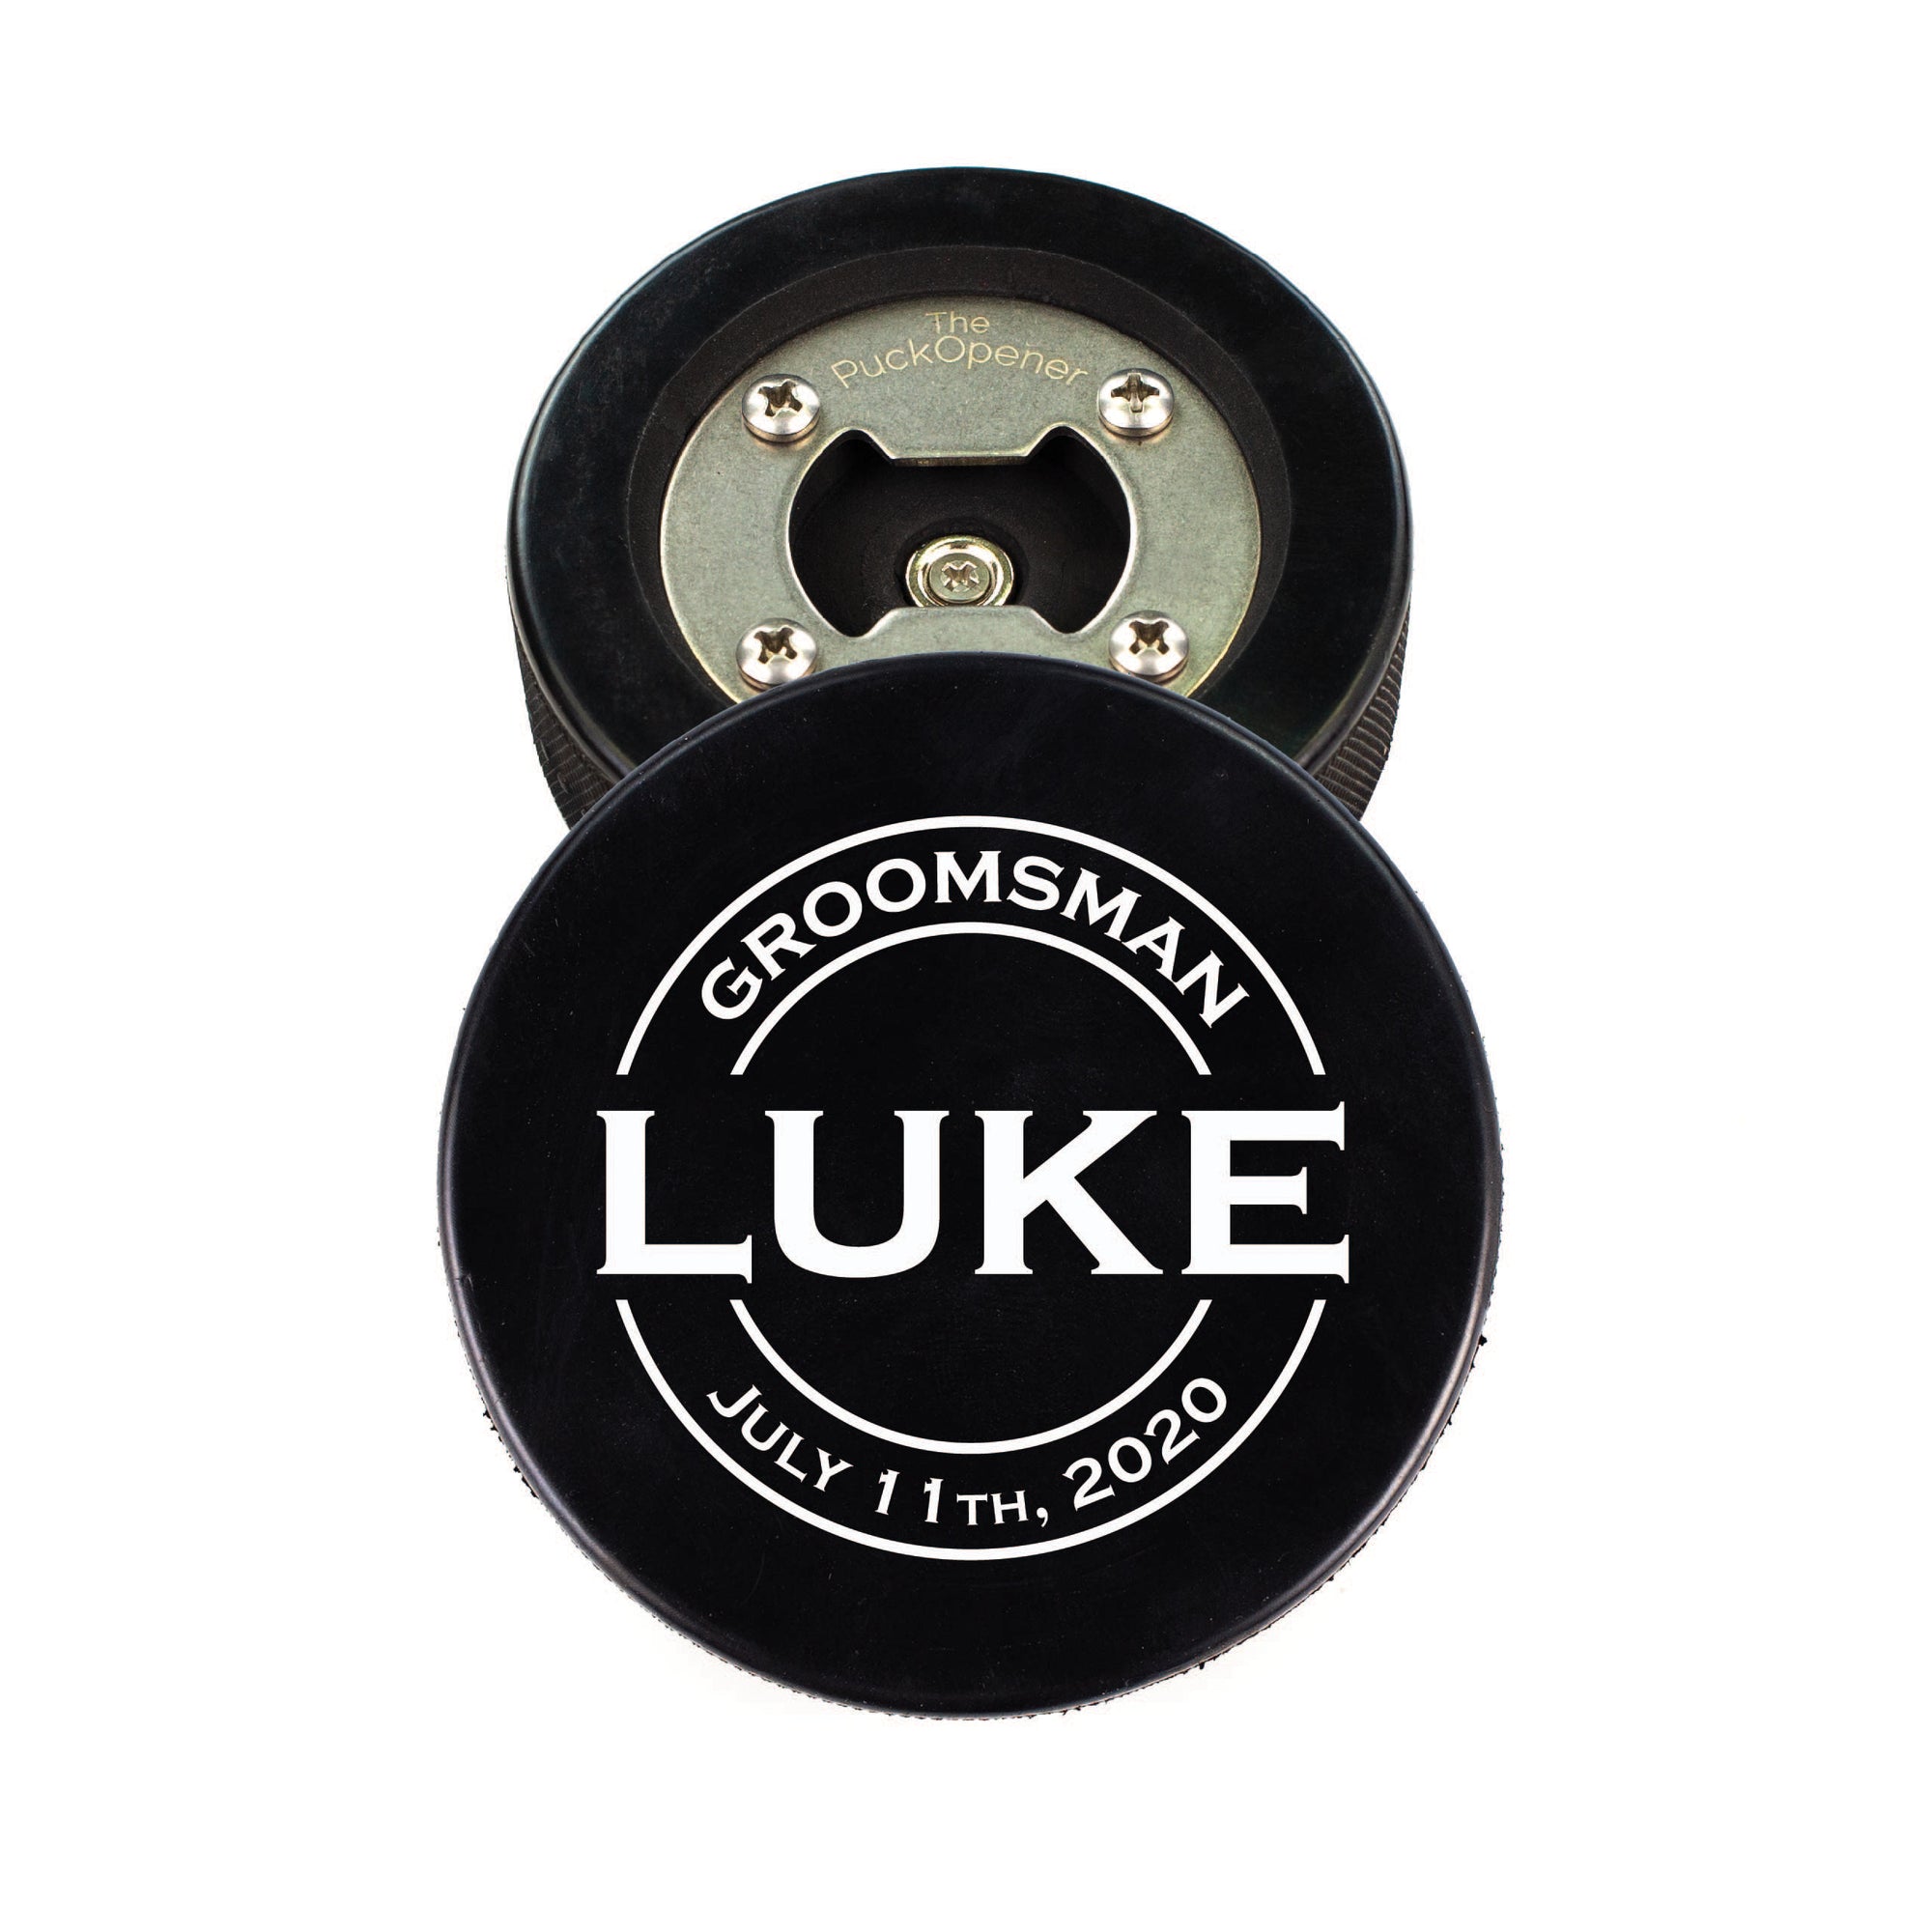 Hockey Puck Bottle Opener with Circle Personalization Text Design